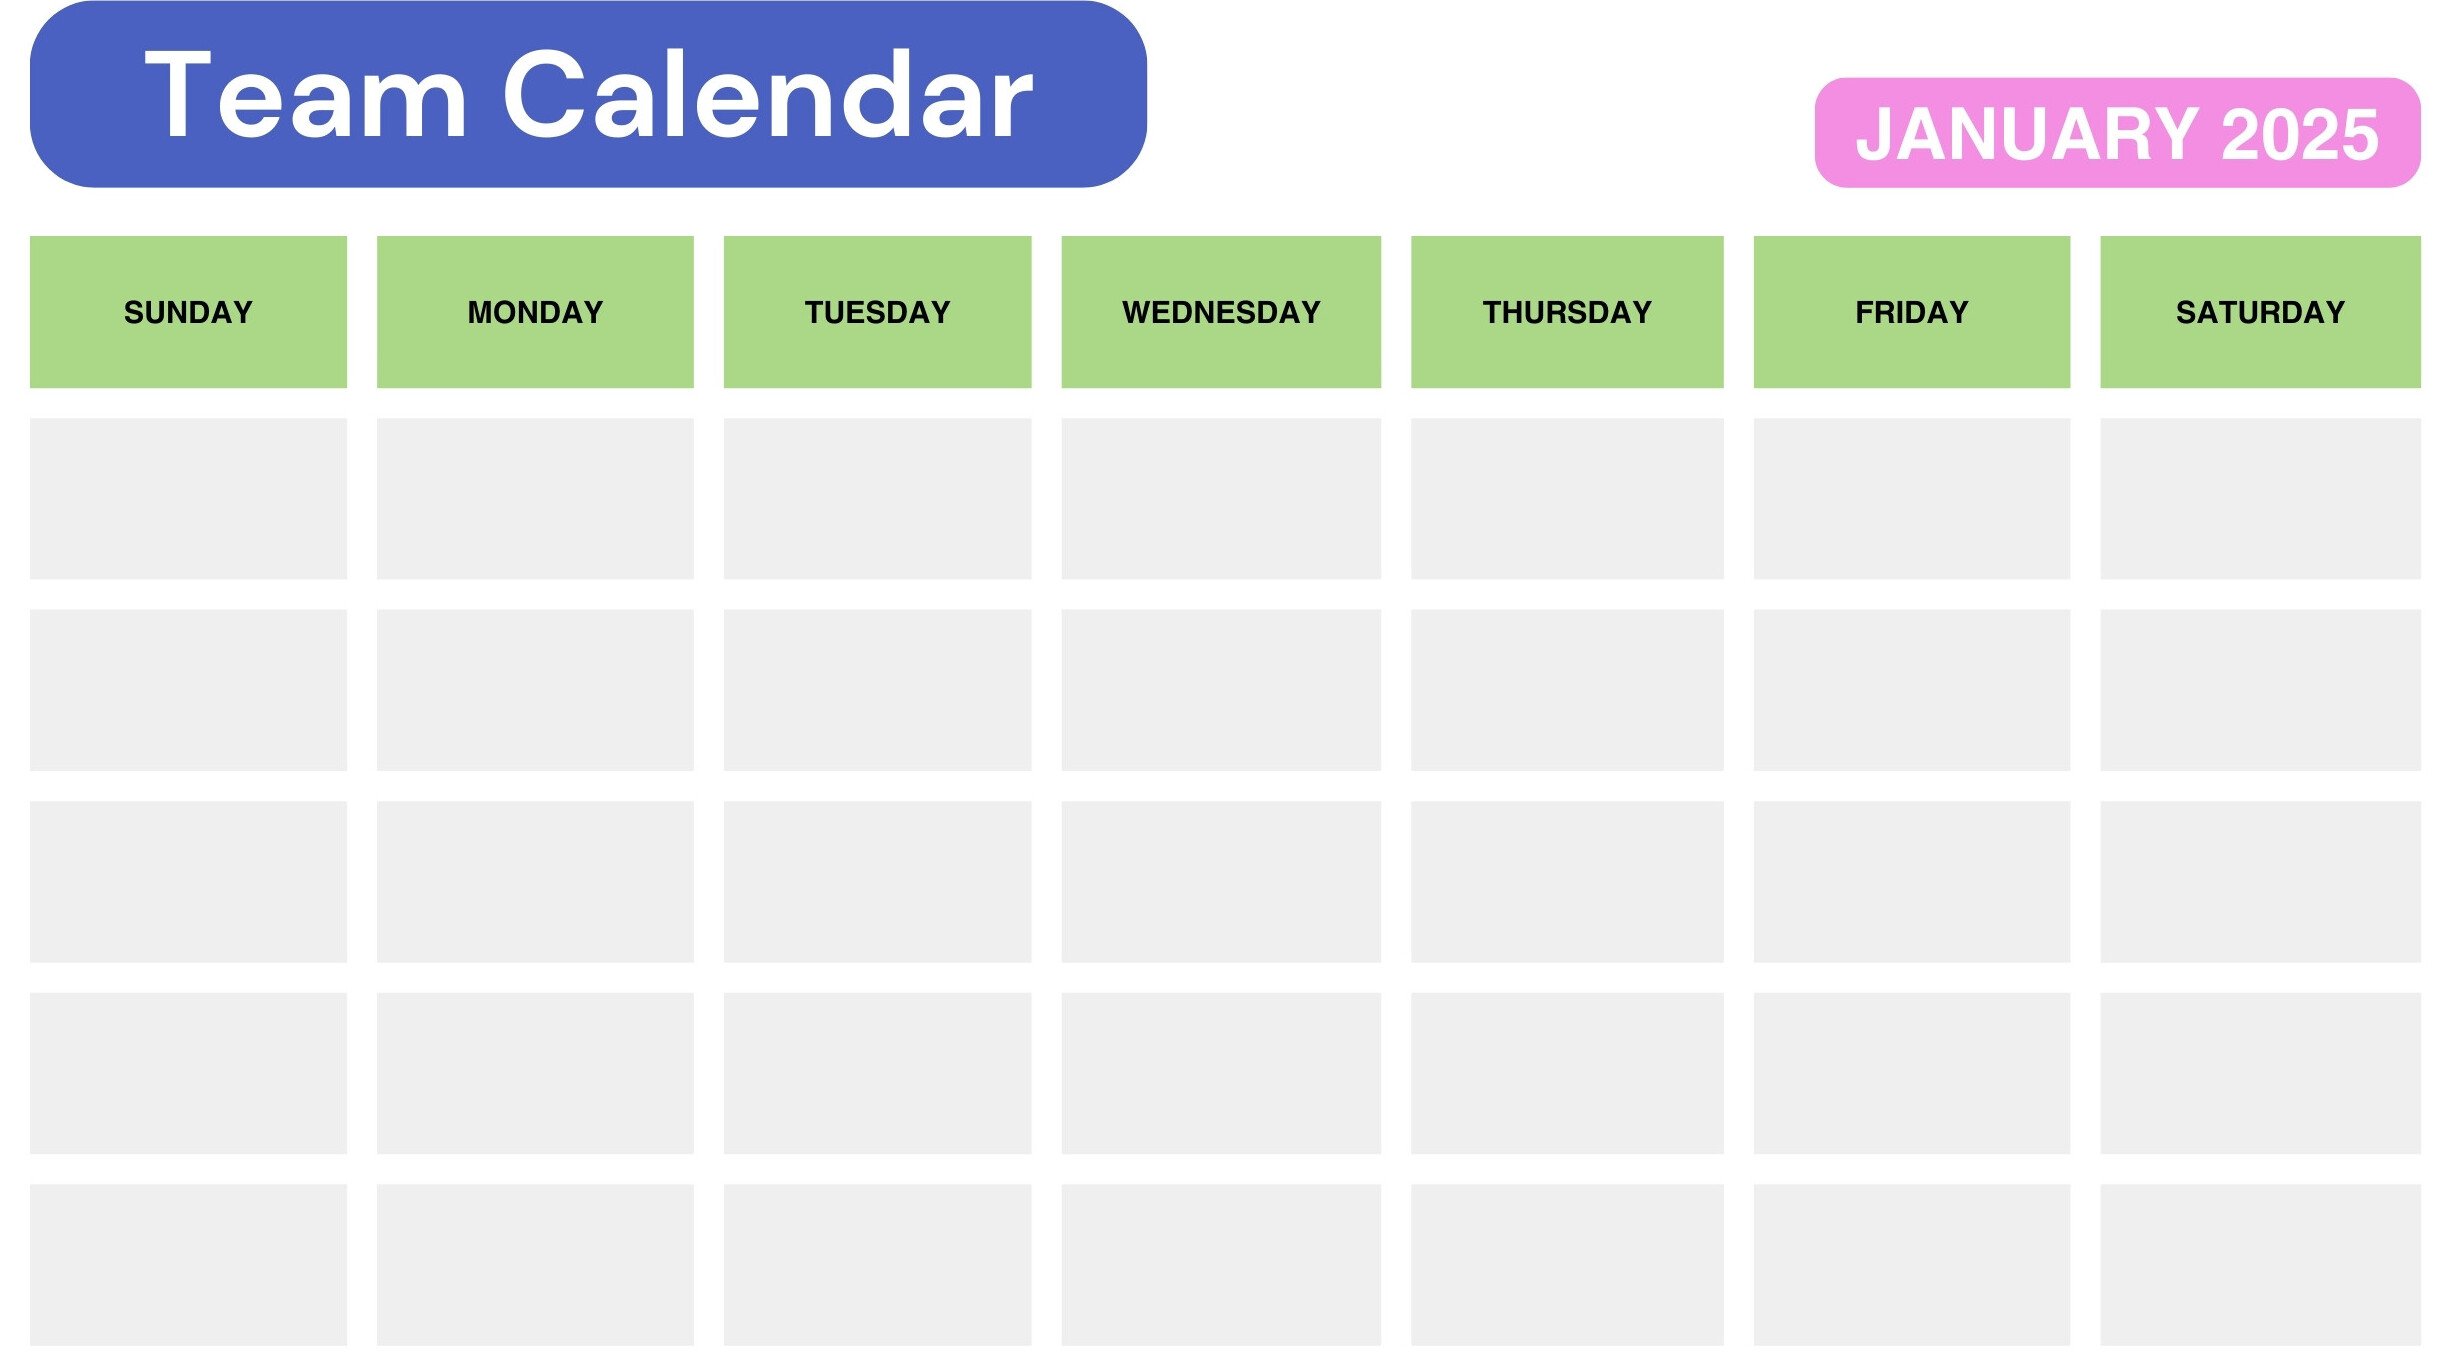 Calendar Planning Whiteboard in Blue Pink Spaced Color Blocks Style